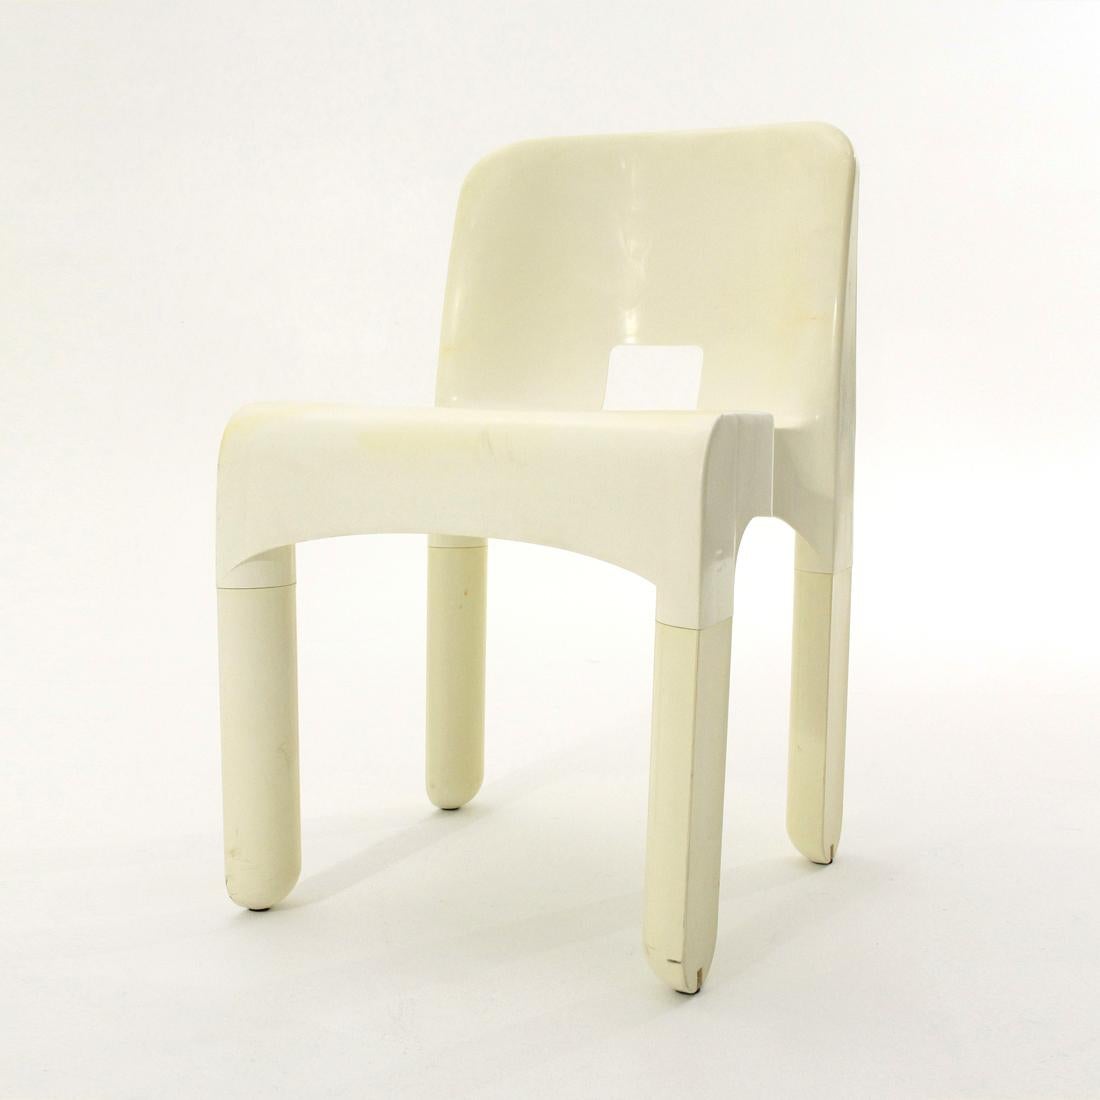 6 “4860” Chairs in White Plastic by Joe Colombo for Kartell, 1960s 6